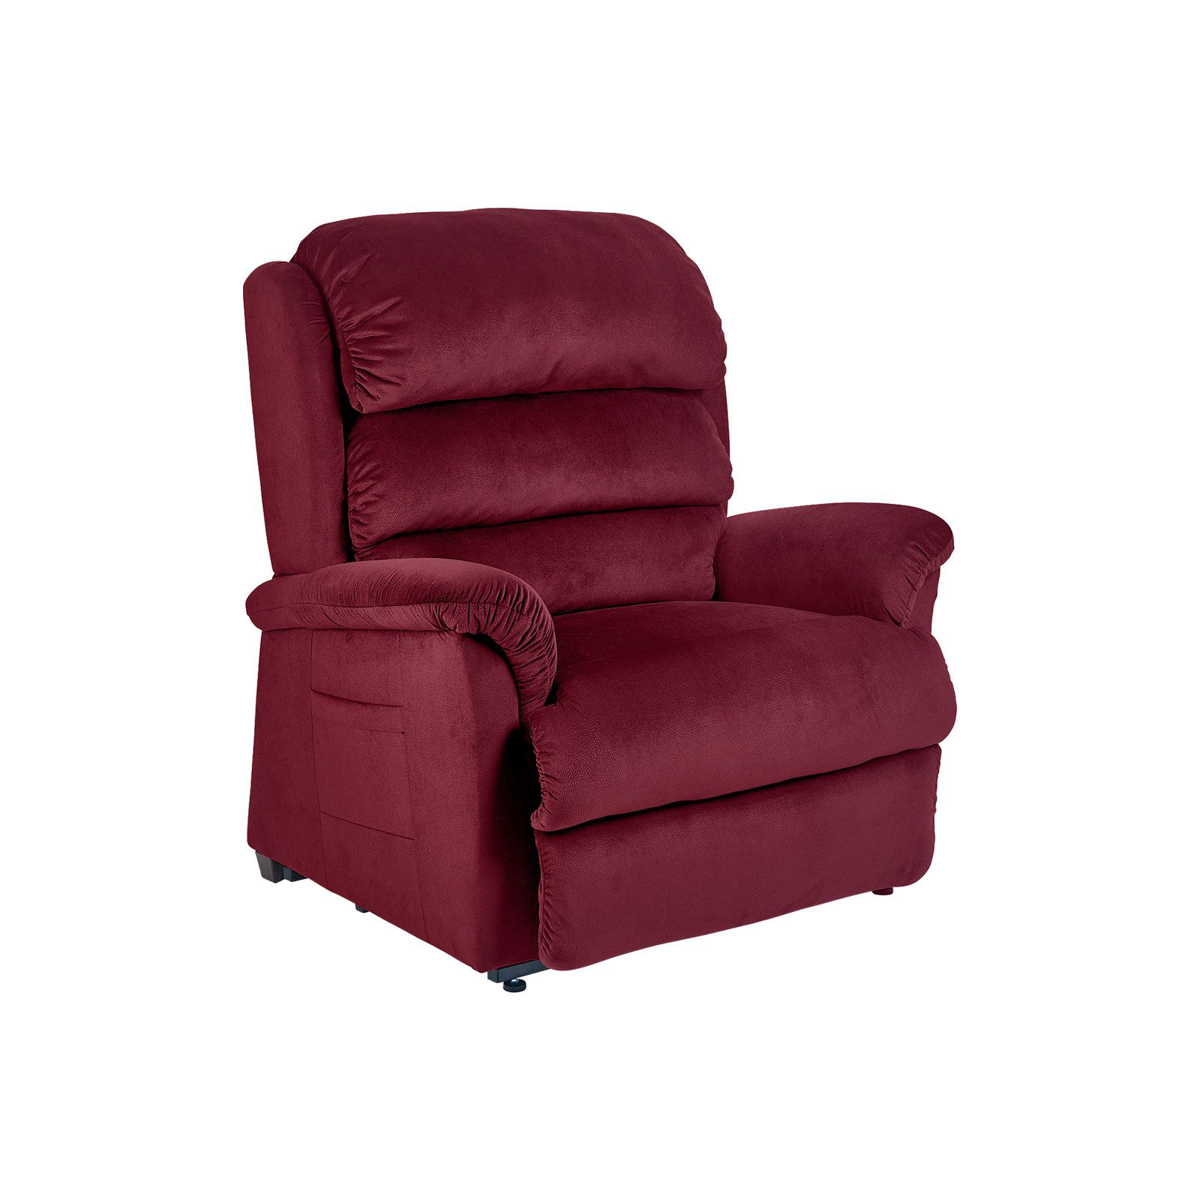 Picture of Polaris Tuscan Small Lift Chair